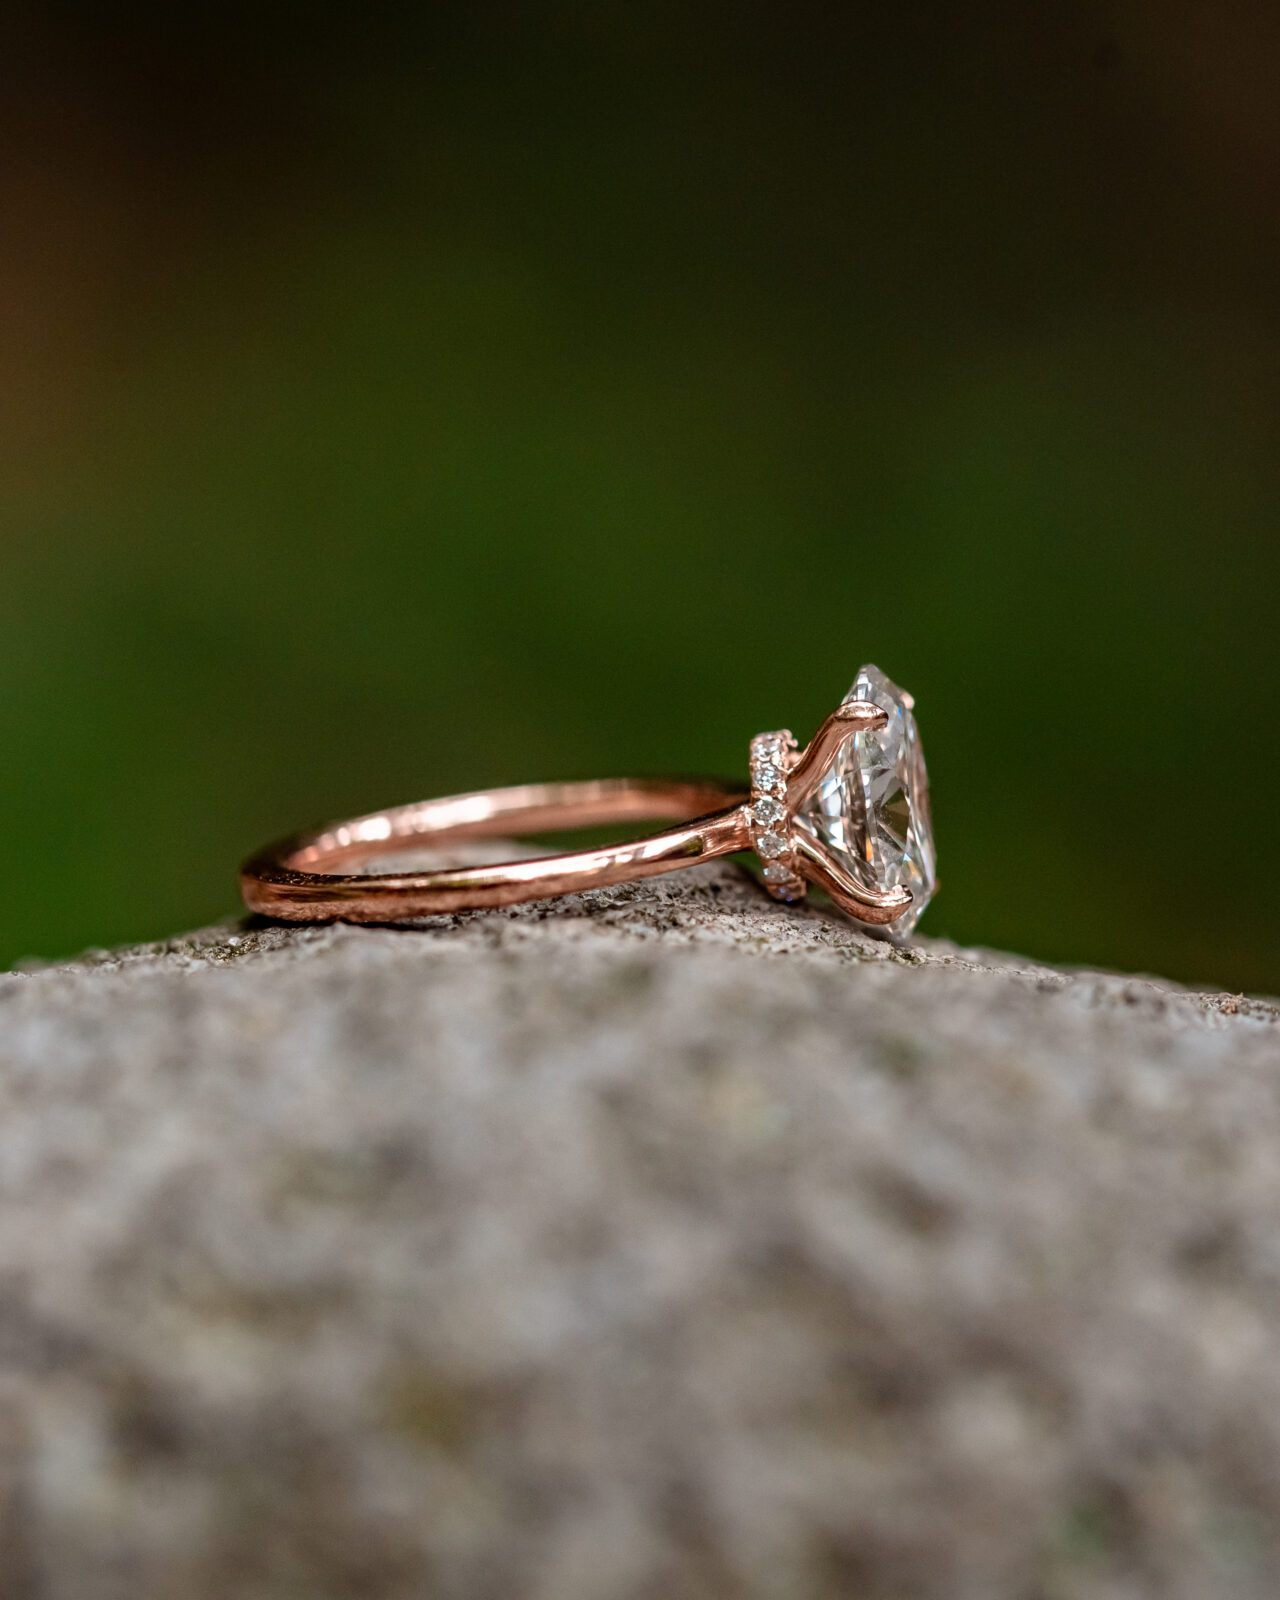 Close-up of the engagement ring during the magical proposal moment